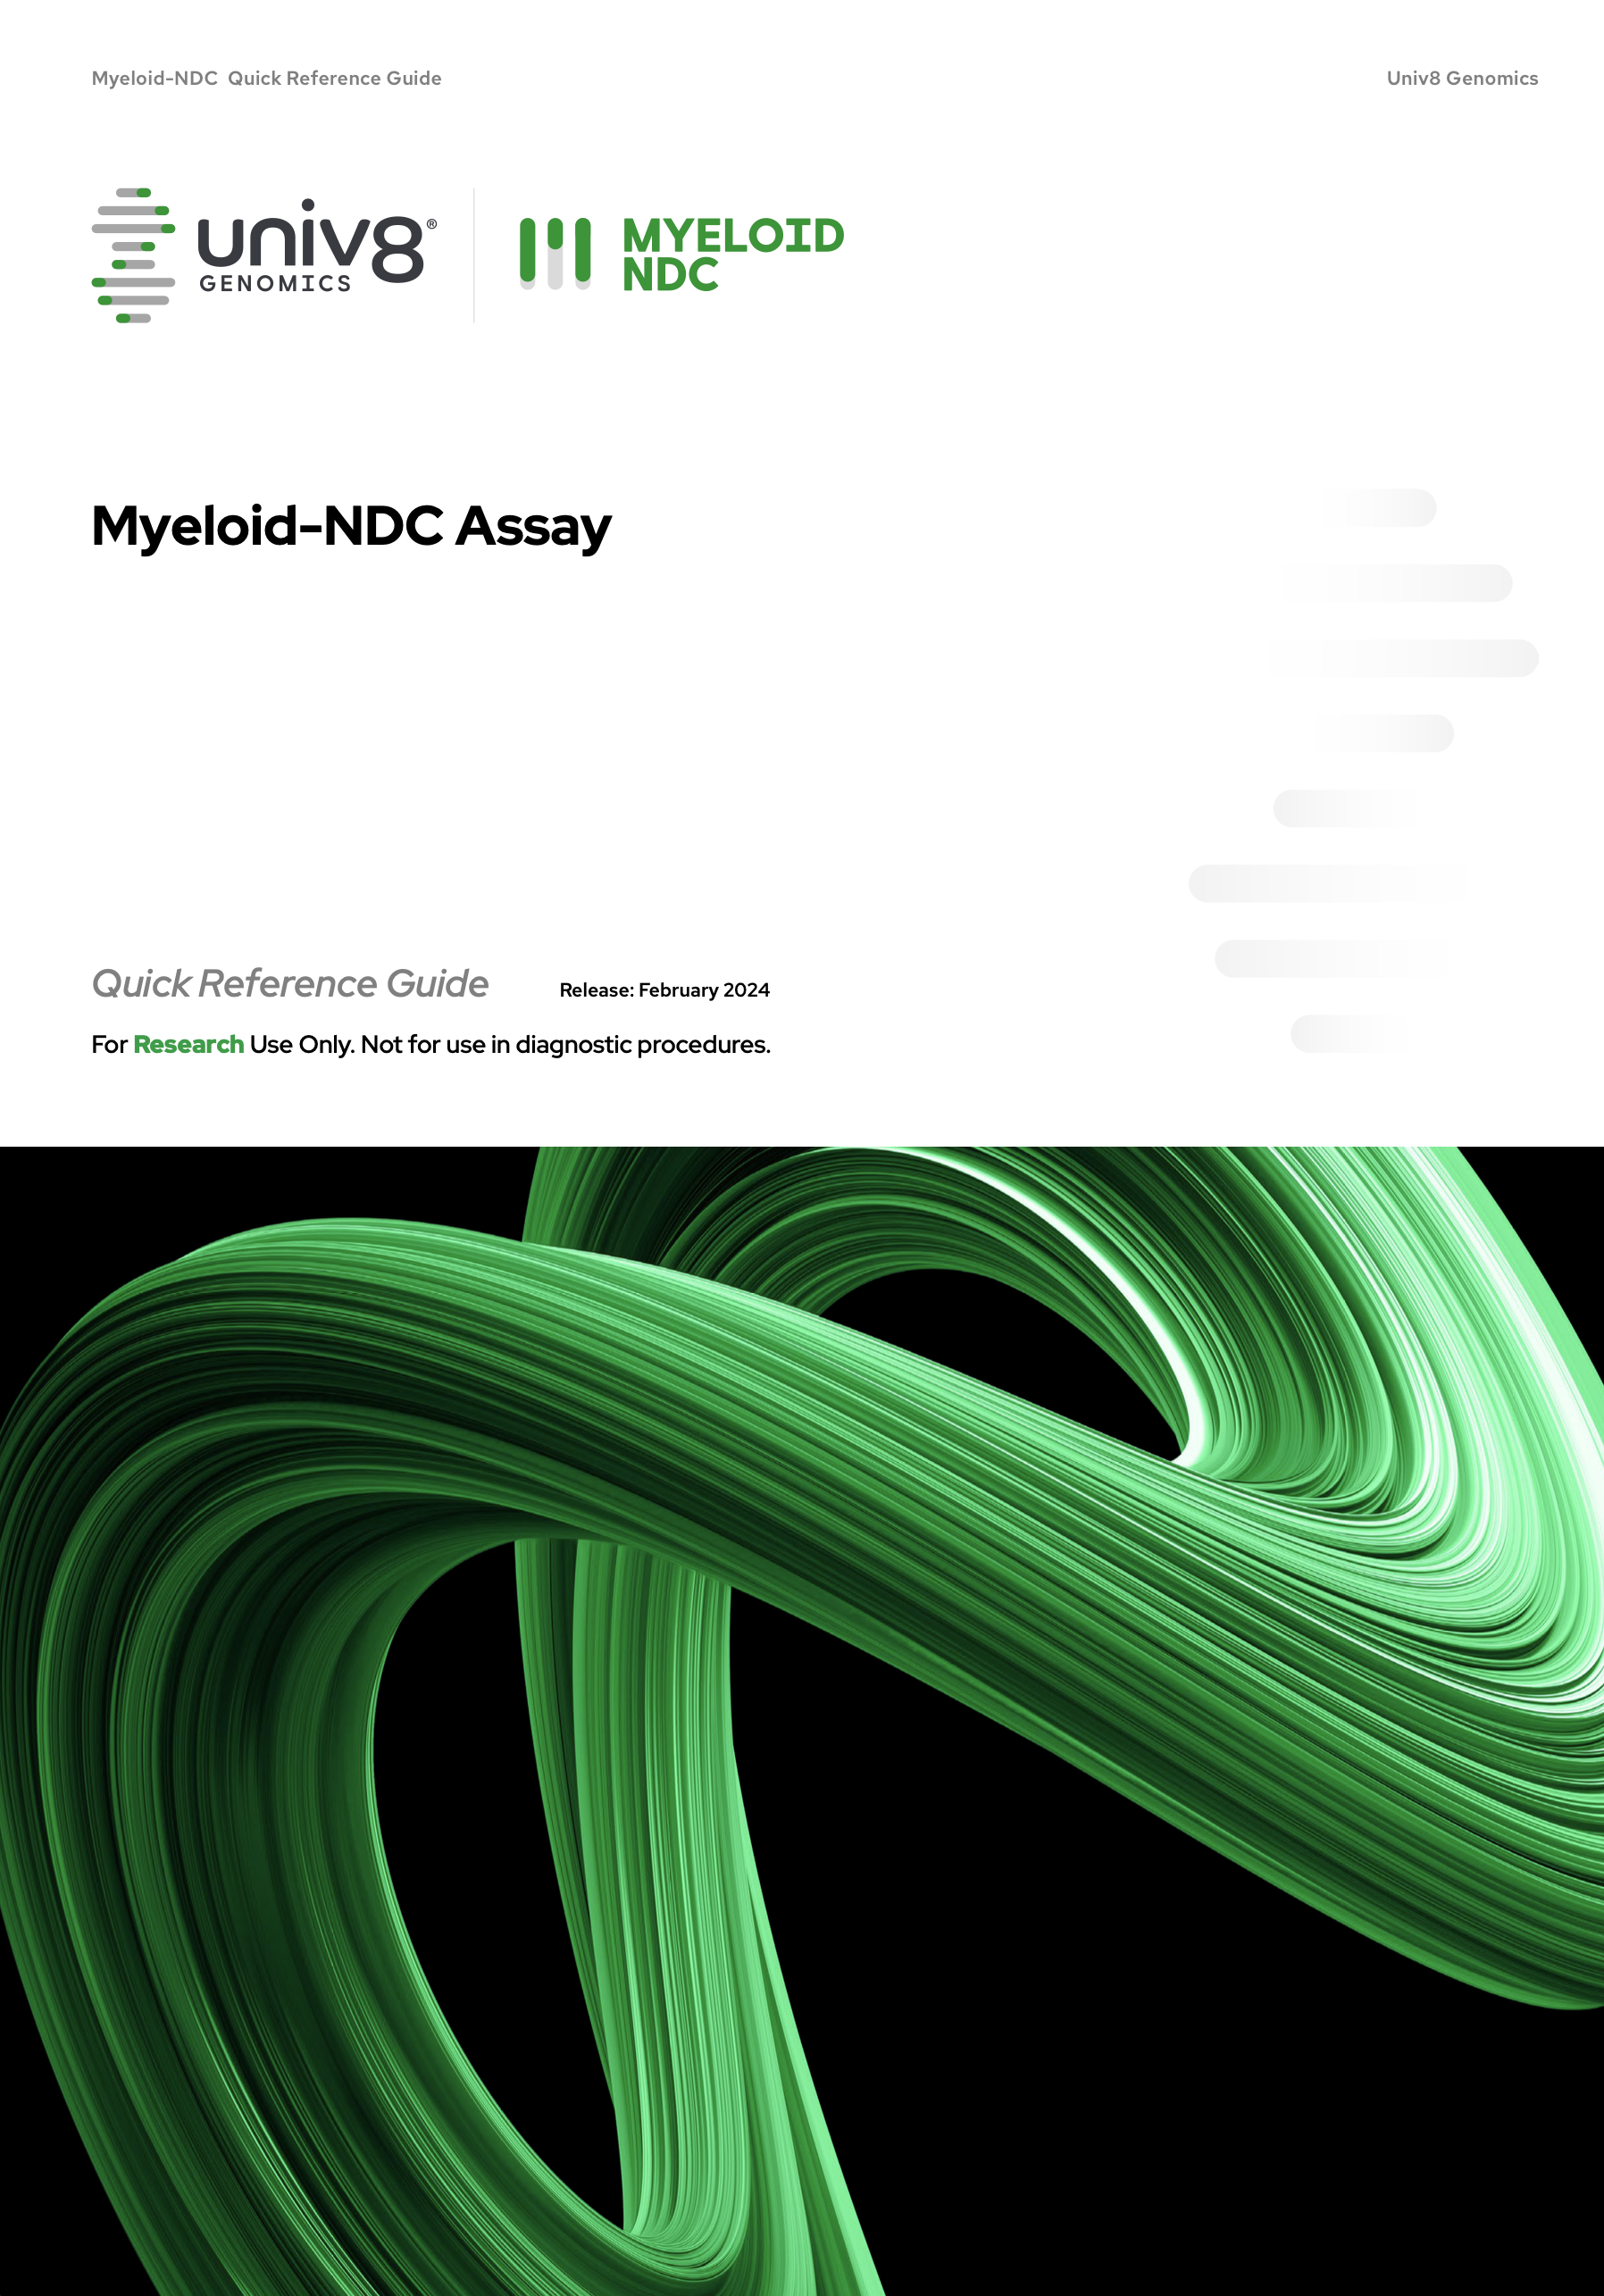 Cover of Myeloid-NDC Quick Reference Guide